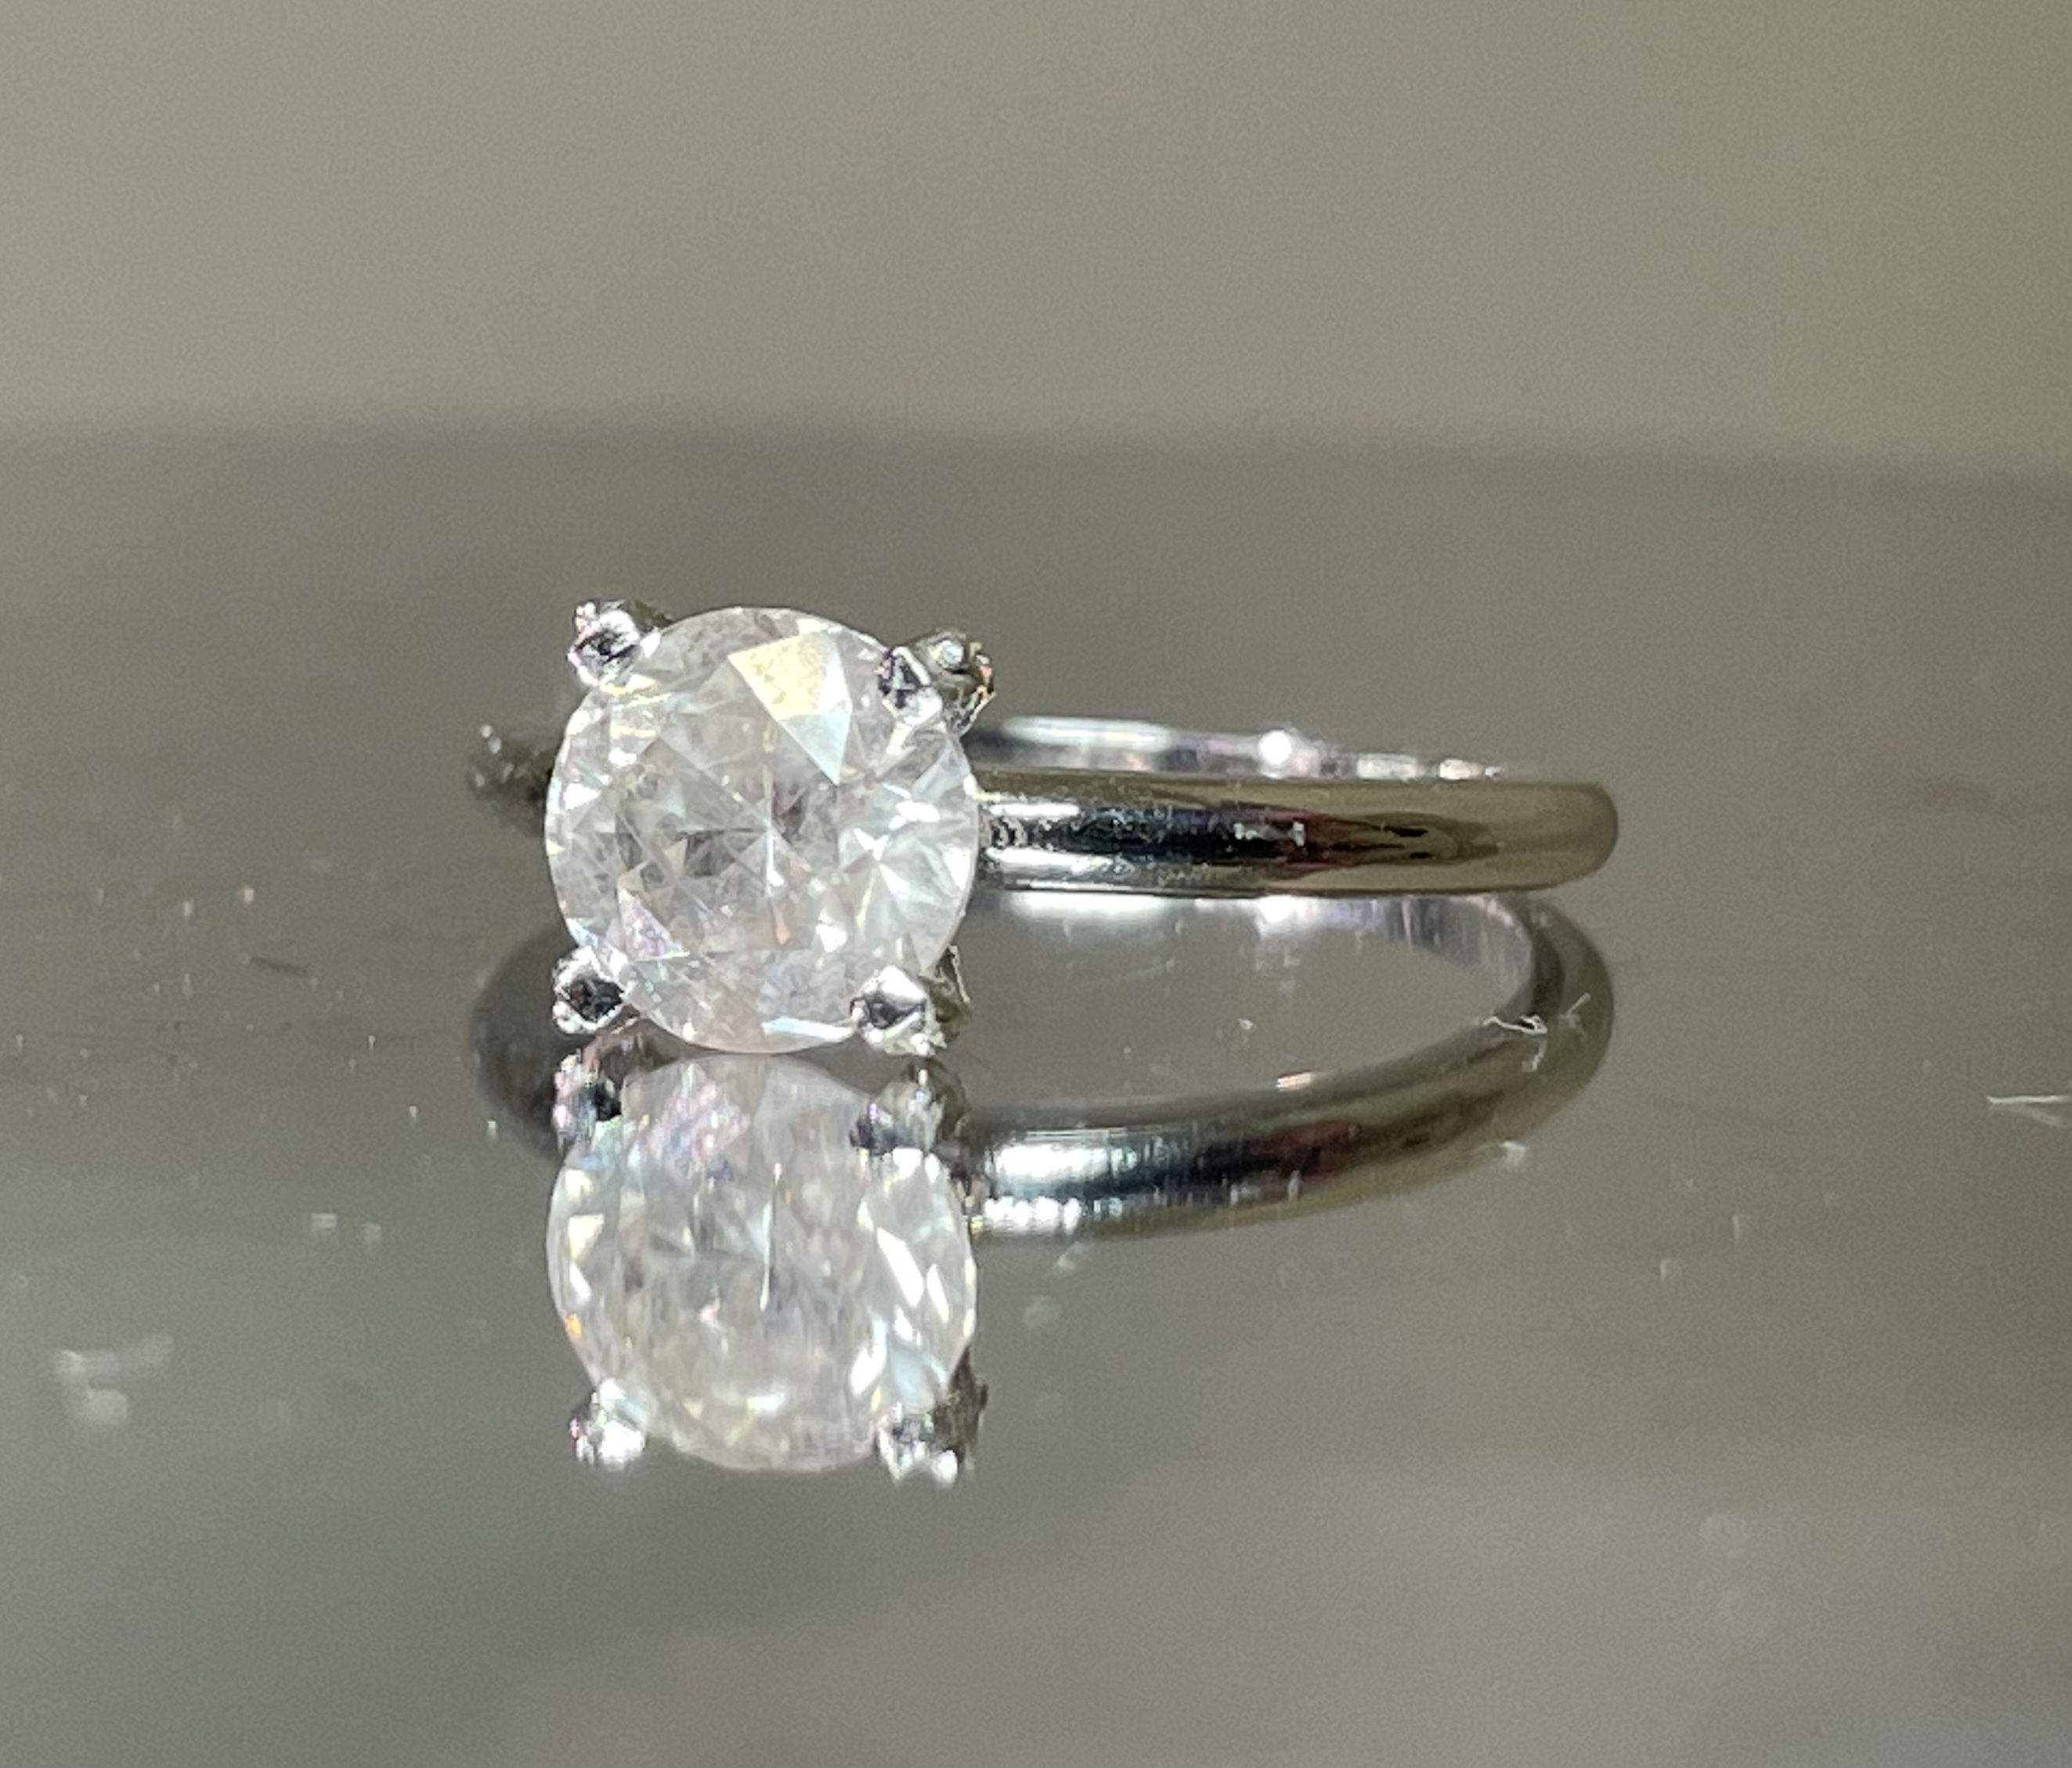 Beautiful Natural 1.72 CT Solitaire Diamond Ring With 18k Gold - Image 7 of 13